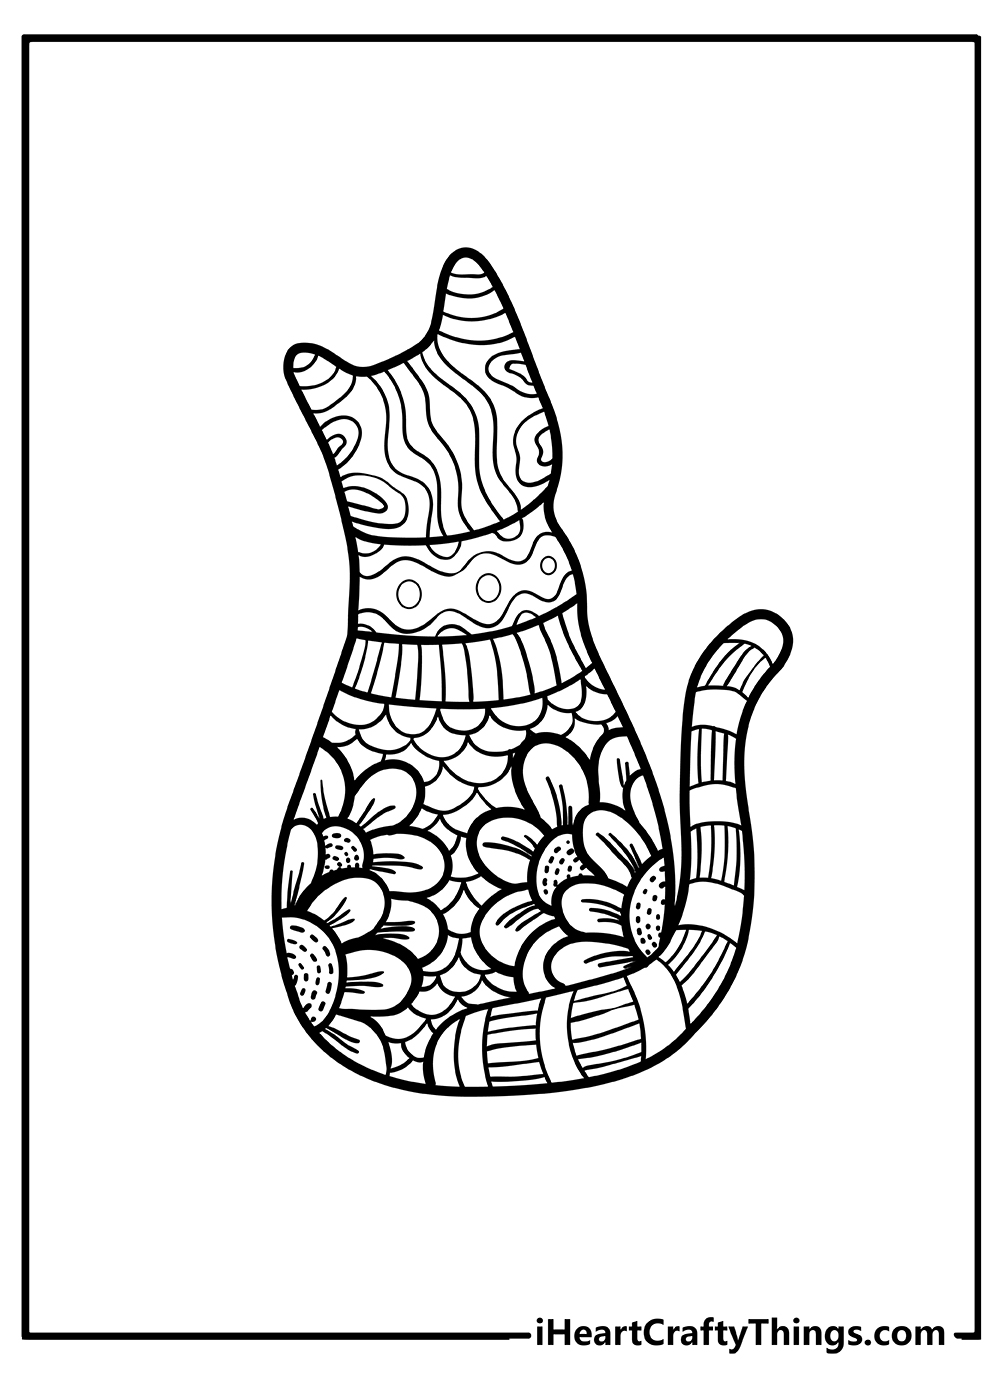 Animal Coloring Pages cat free printable sheet